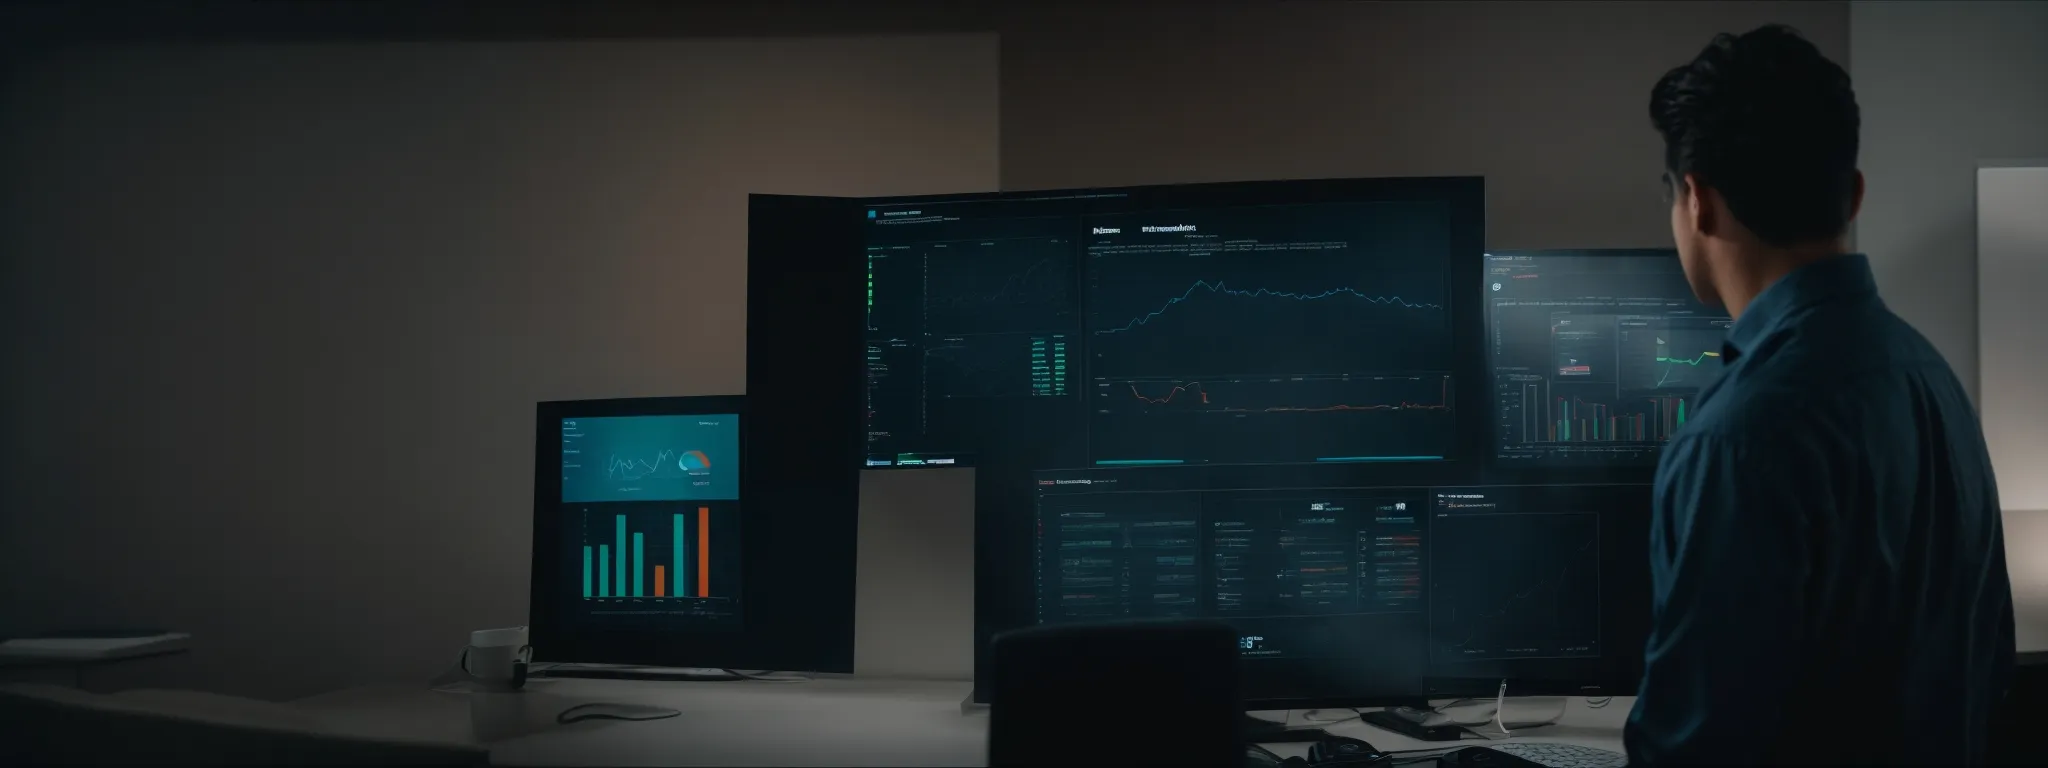 a project manager analyzes a dynamic digital dashboard displaying real-time marketing campaign analytics on a large monitor.